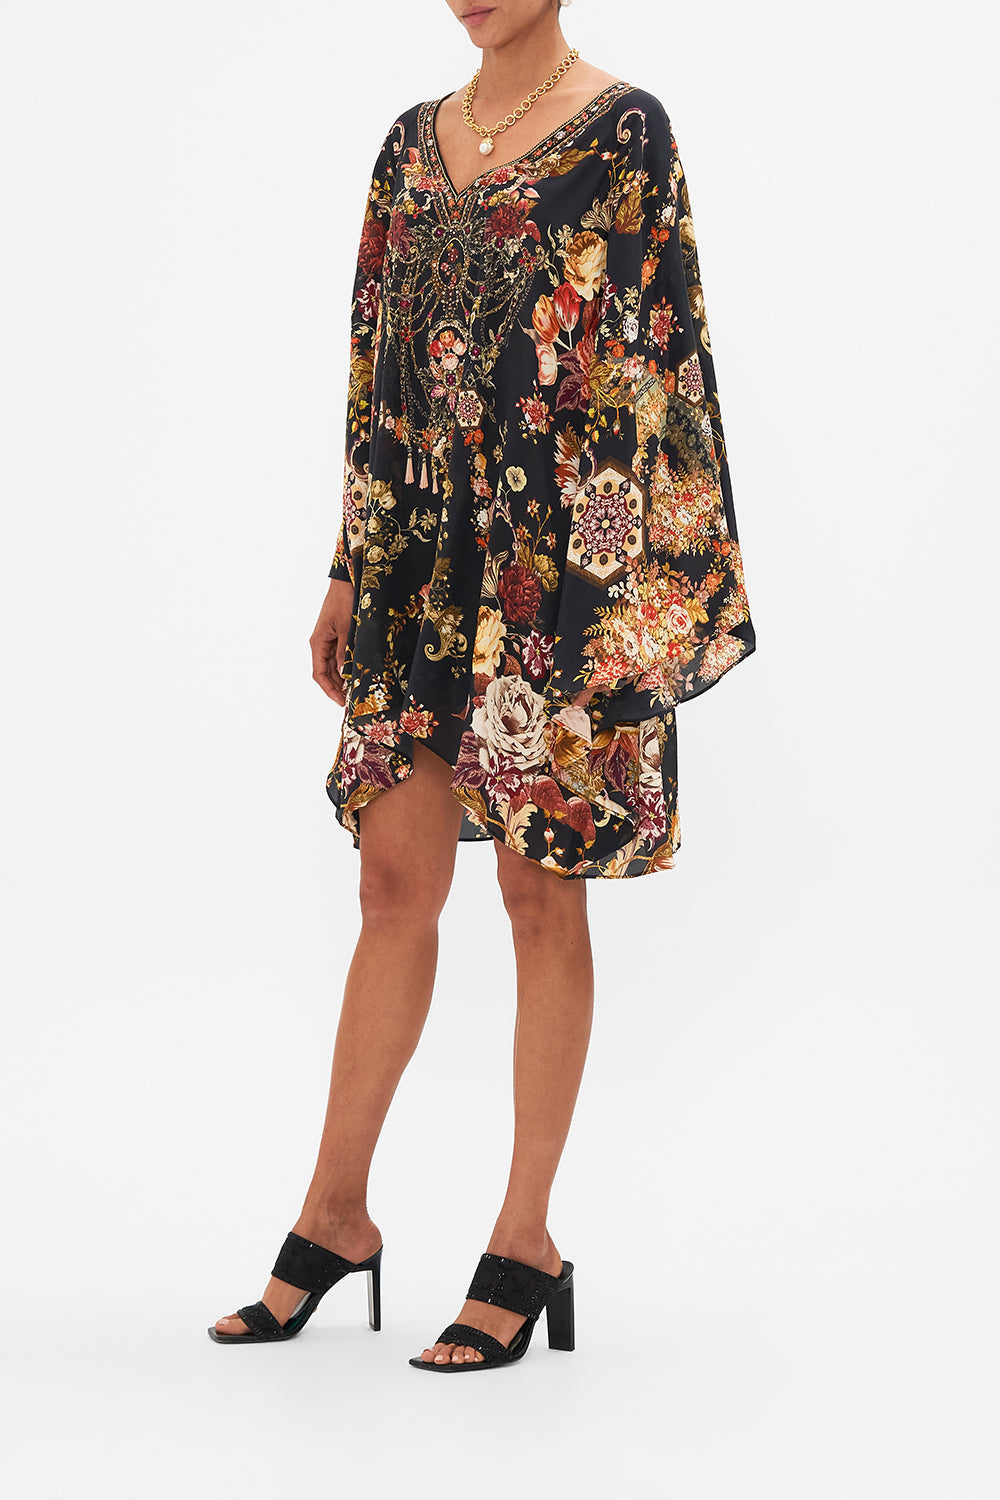 CAMILLA floral Raglan Sleeve Flared Kaftan in Stitched in Time